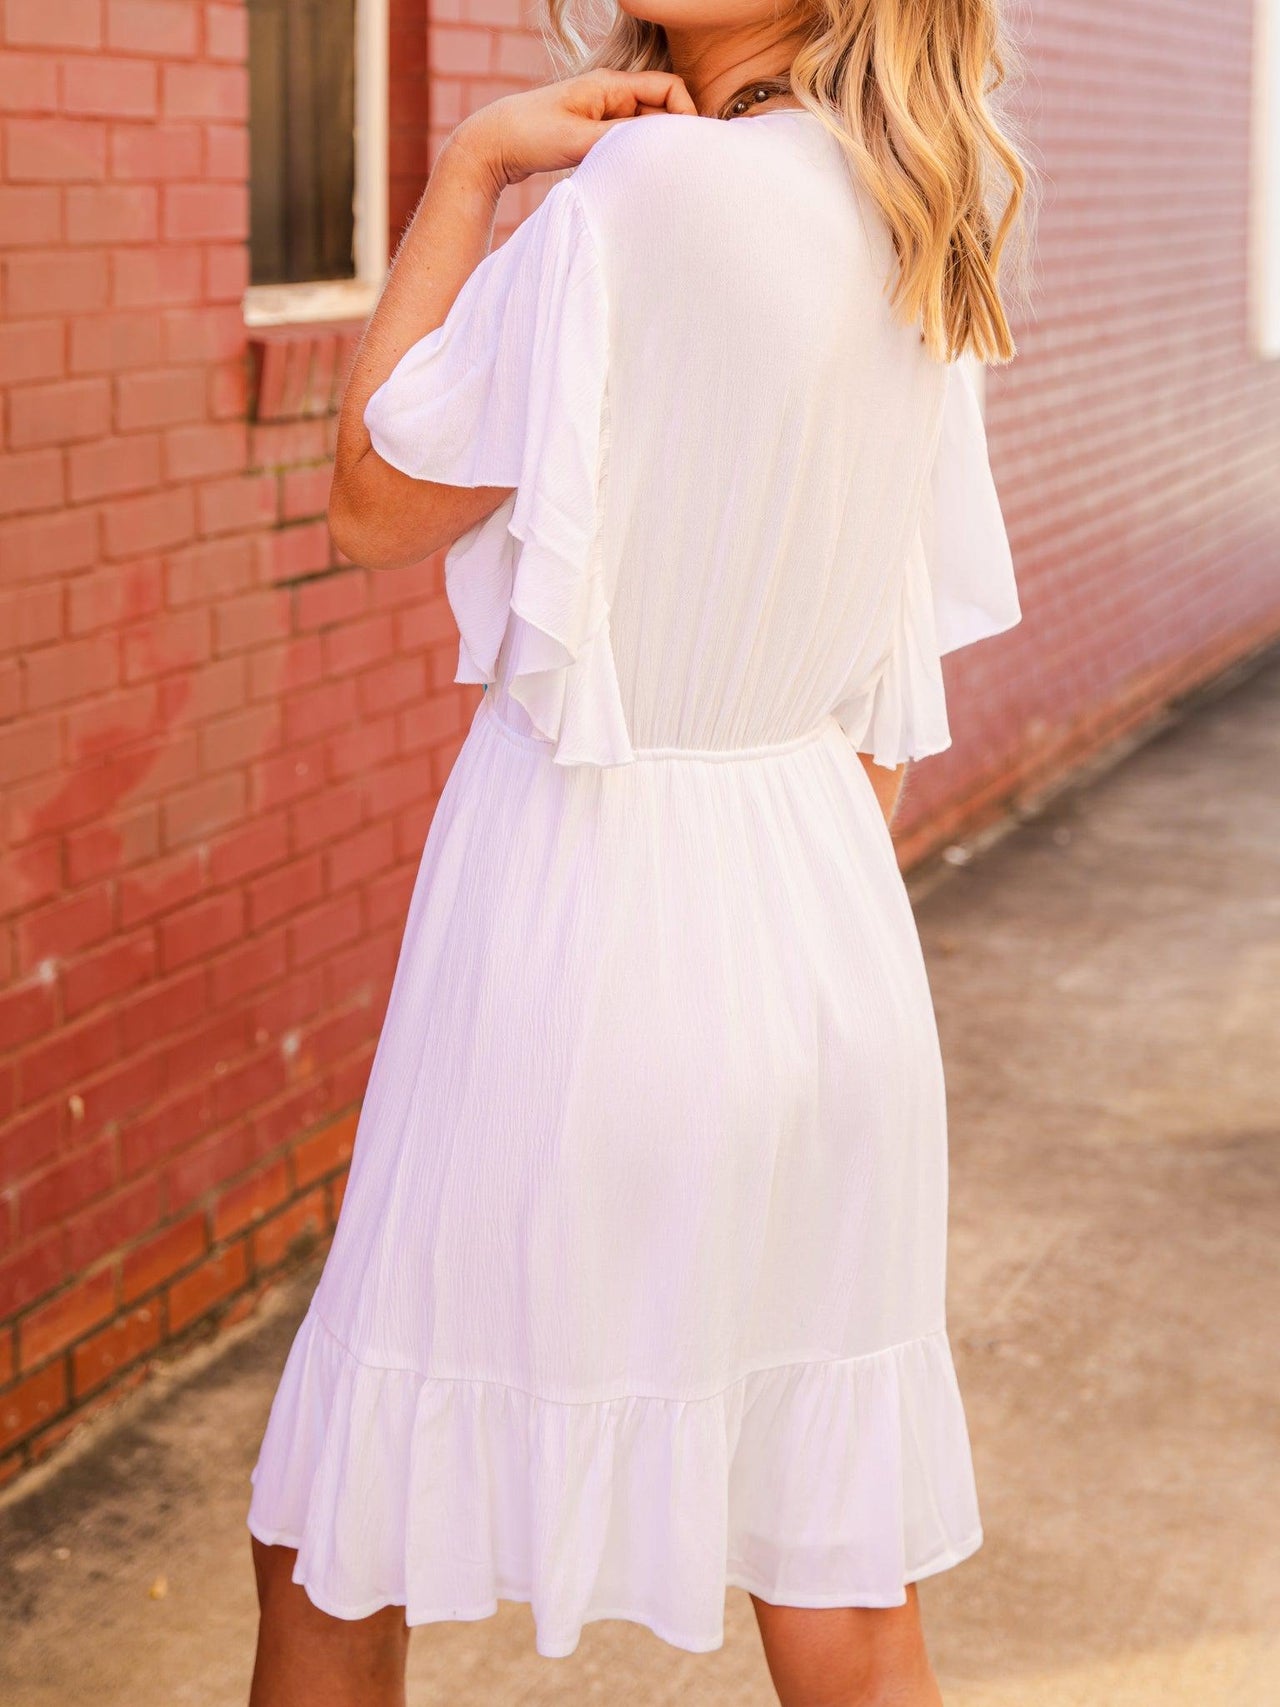 Never Lookin Back Dress - White-Dresses-Southern Fried Chics